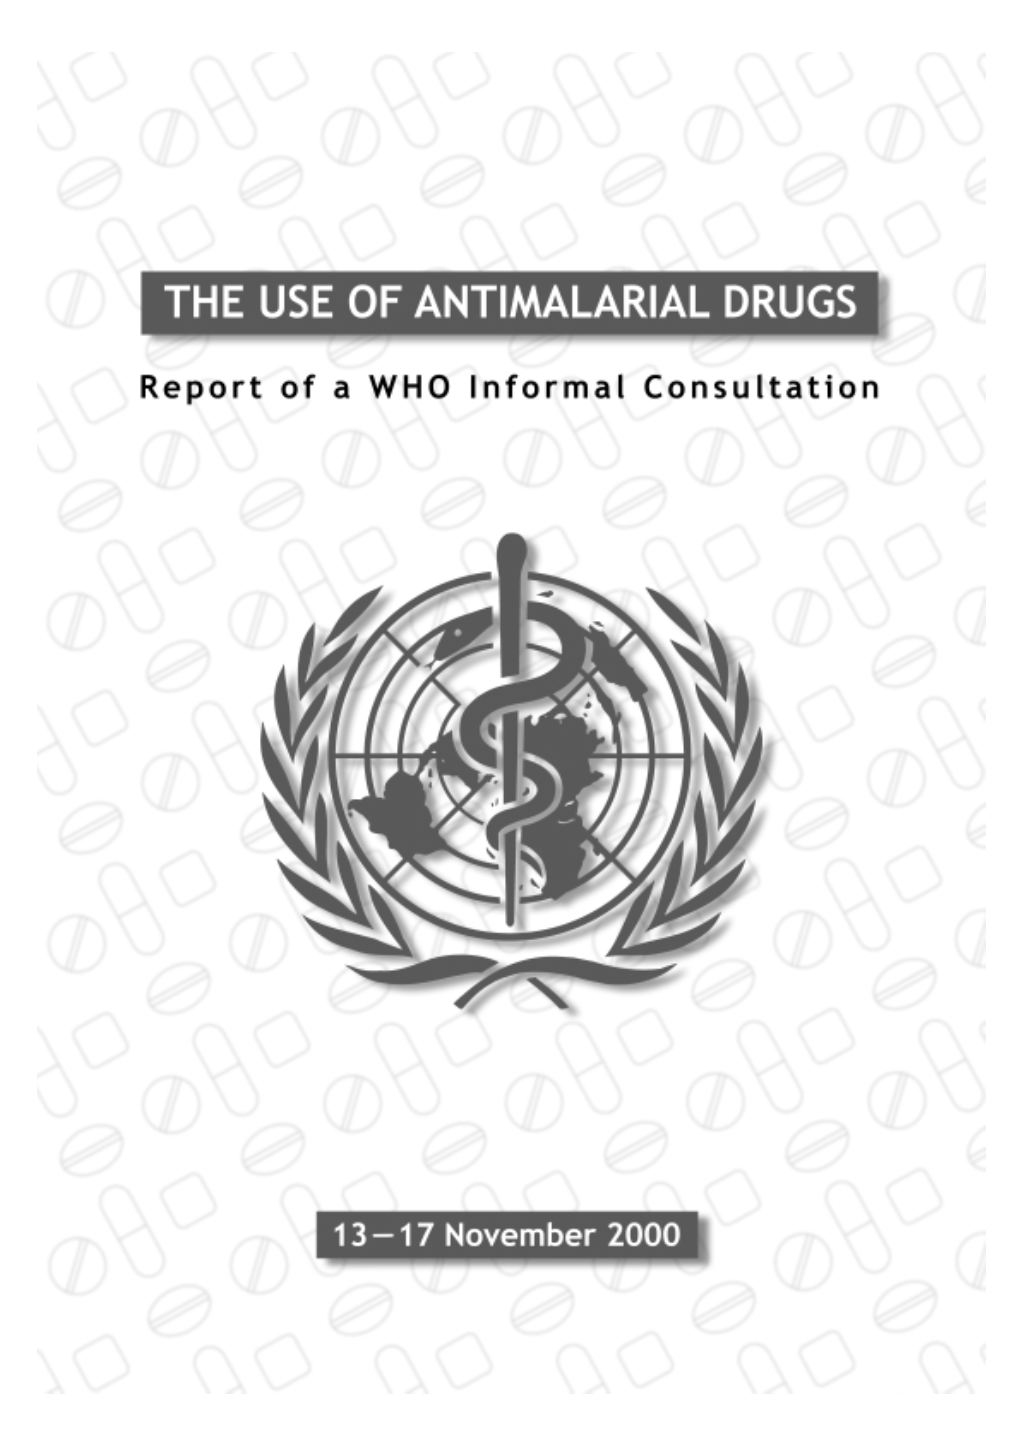 The Use of Antimalarial Drugs